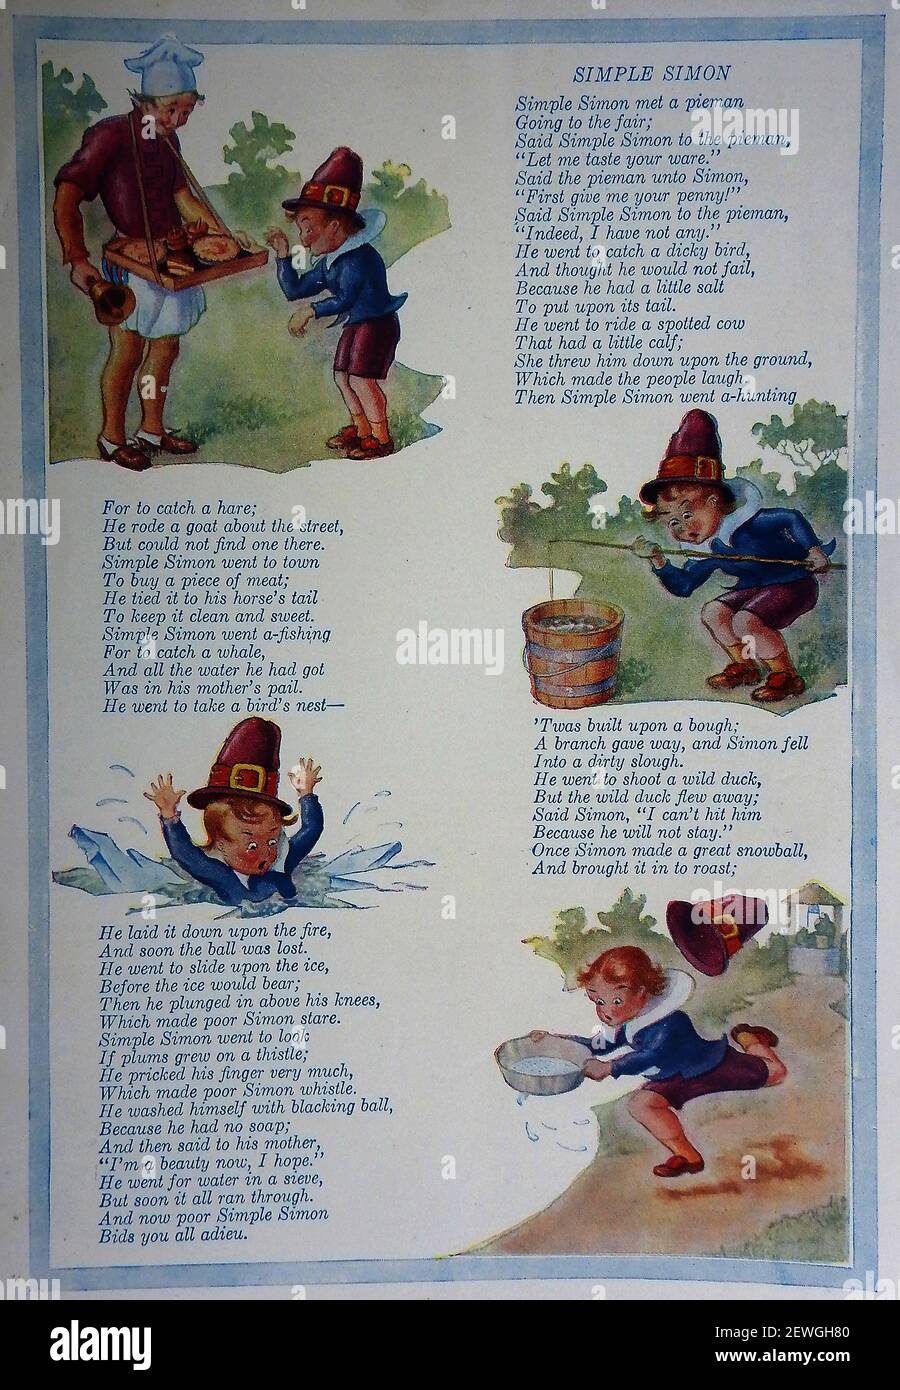 SIMPLE SIMON. An early British colour illustration of the full version (4 extended verses) of the English children's nursery rhyme .----- 'Simple Simon's Misfortunes and his Wife Margery's Cruelty', first appeared about 1685. Some believe however that the ballad refers to a well known simpleton and  London beggar of the very early 1700s, Simon Edy. He was also known as Old Simon and owned a number of dogs and collected discarded bric-a-brac that he had found in the streets &  begged outside the churchyard of St Giles in the Fields Stock Photo